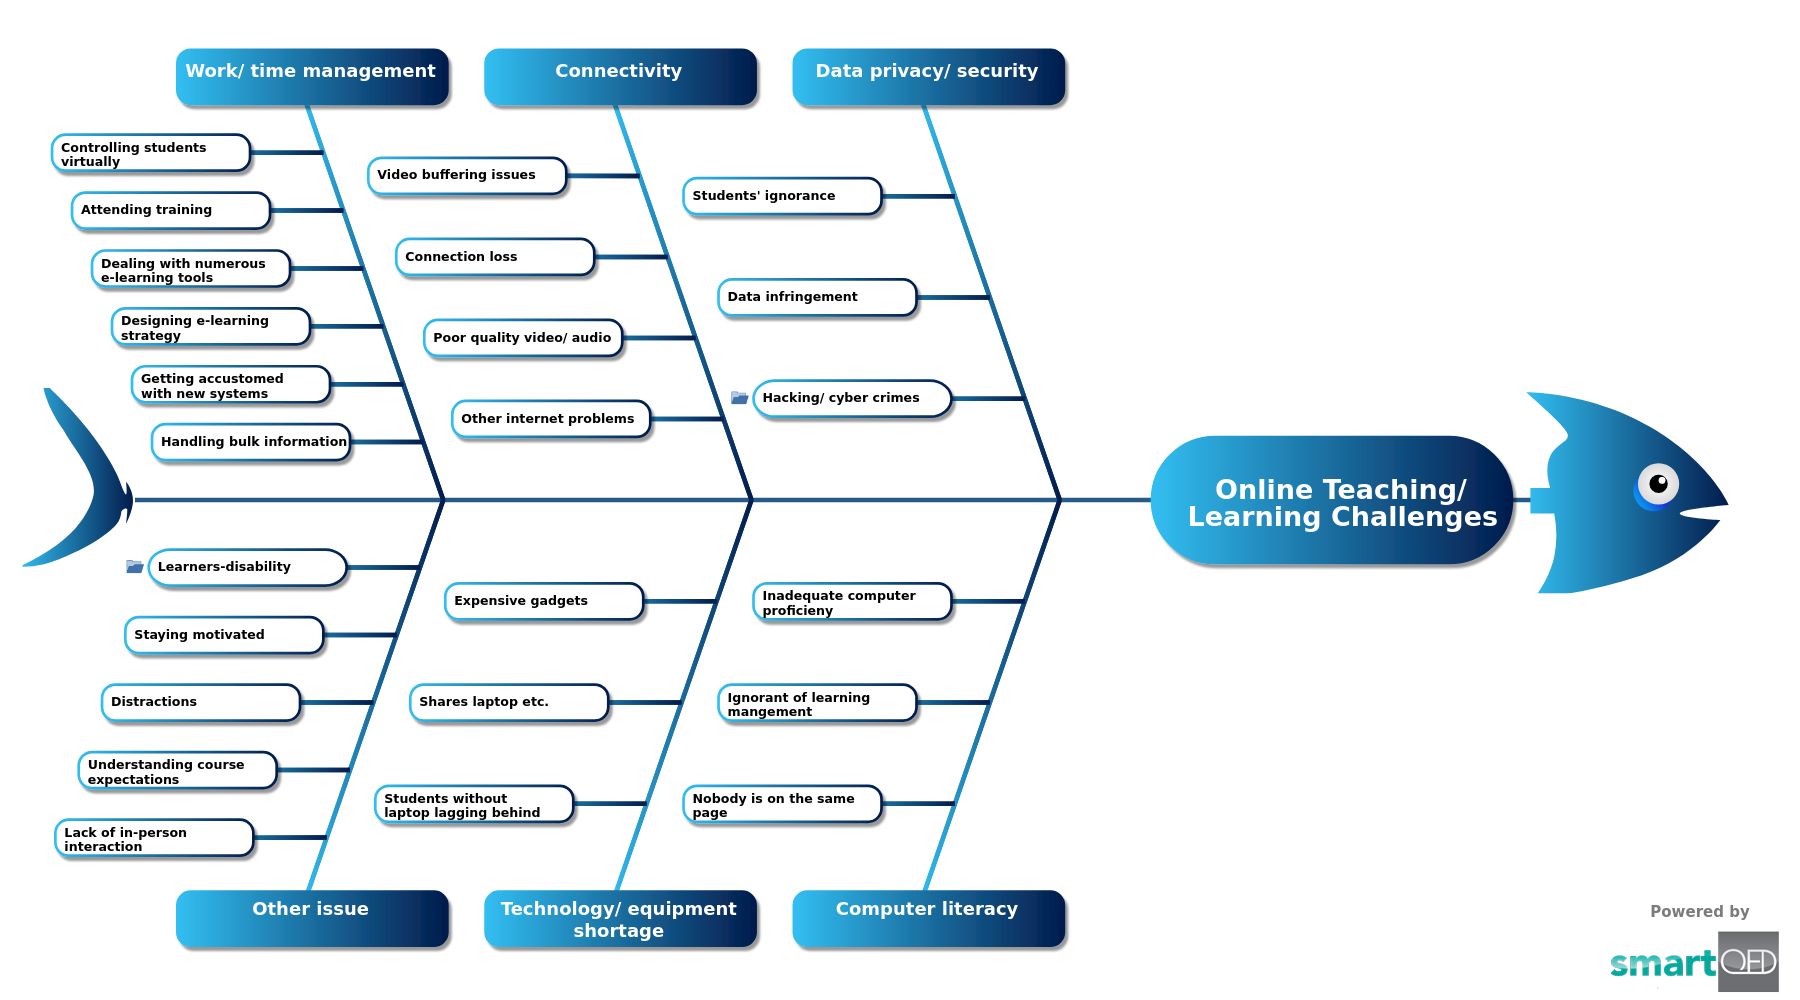 Fishbone on Online/ Teaching Learning Challenges